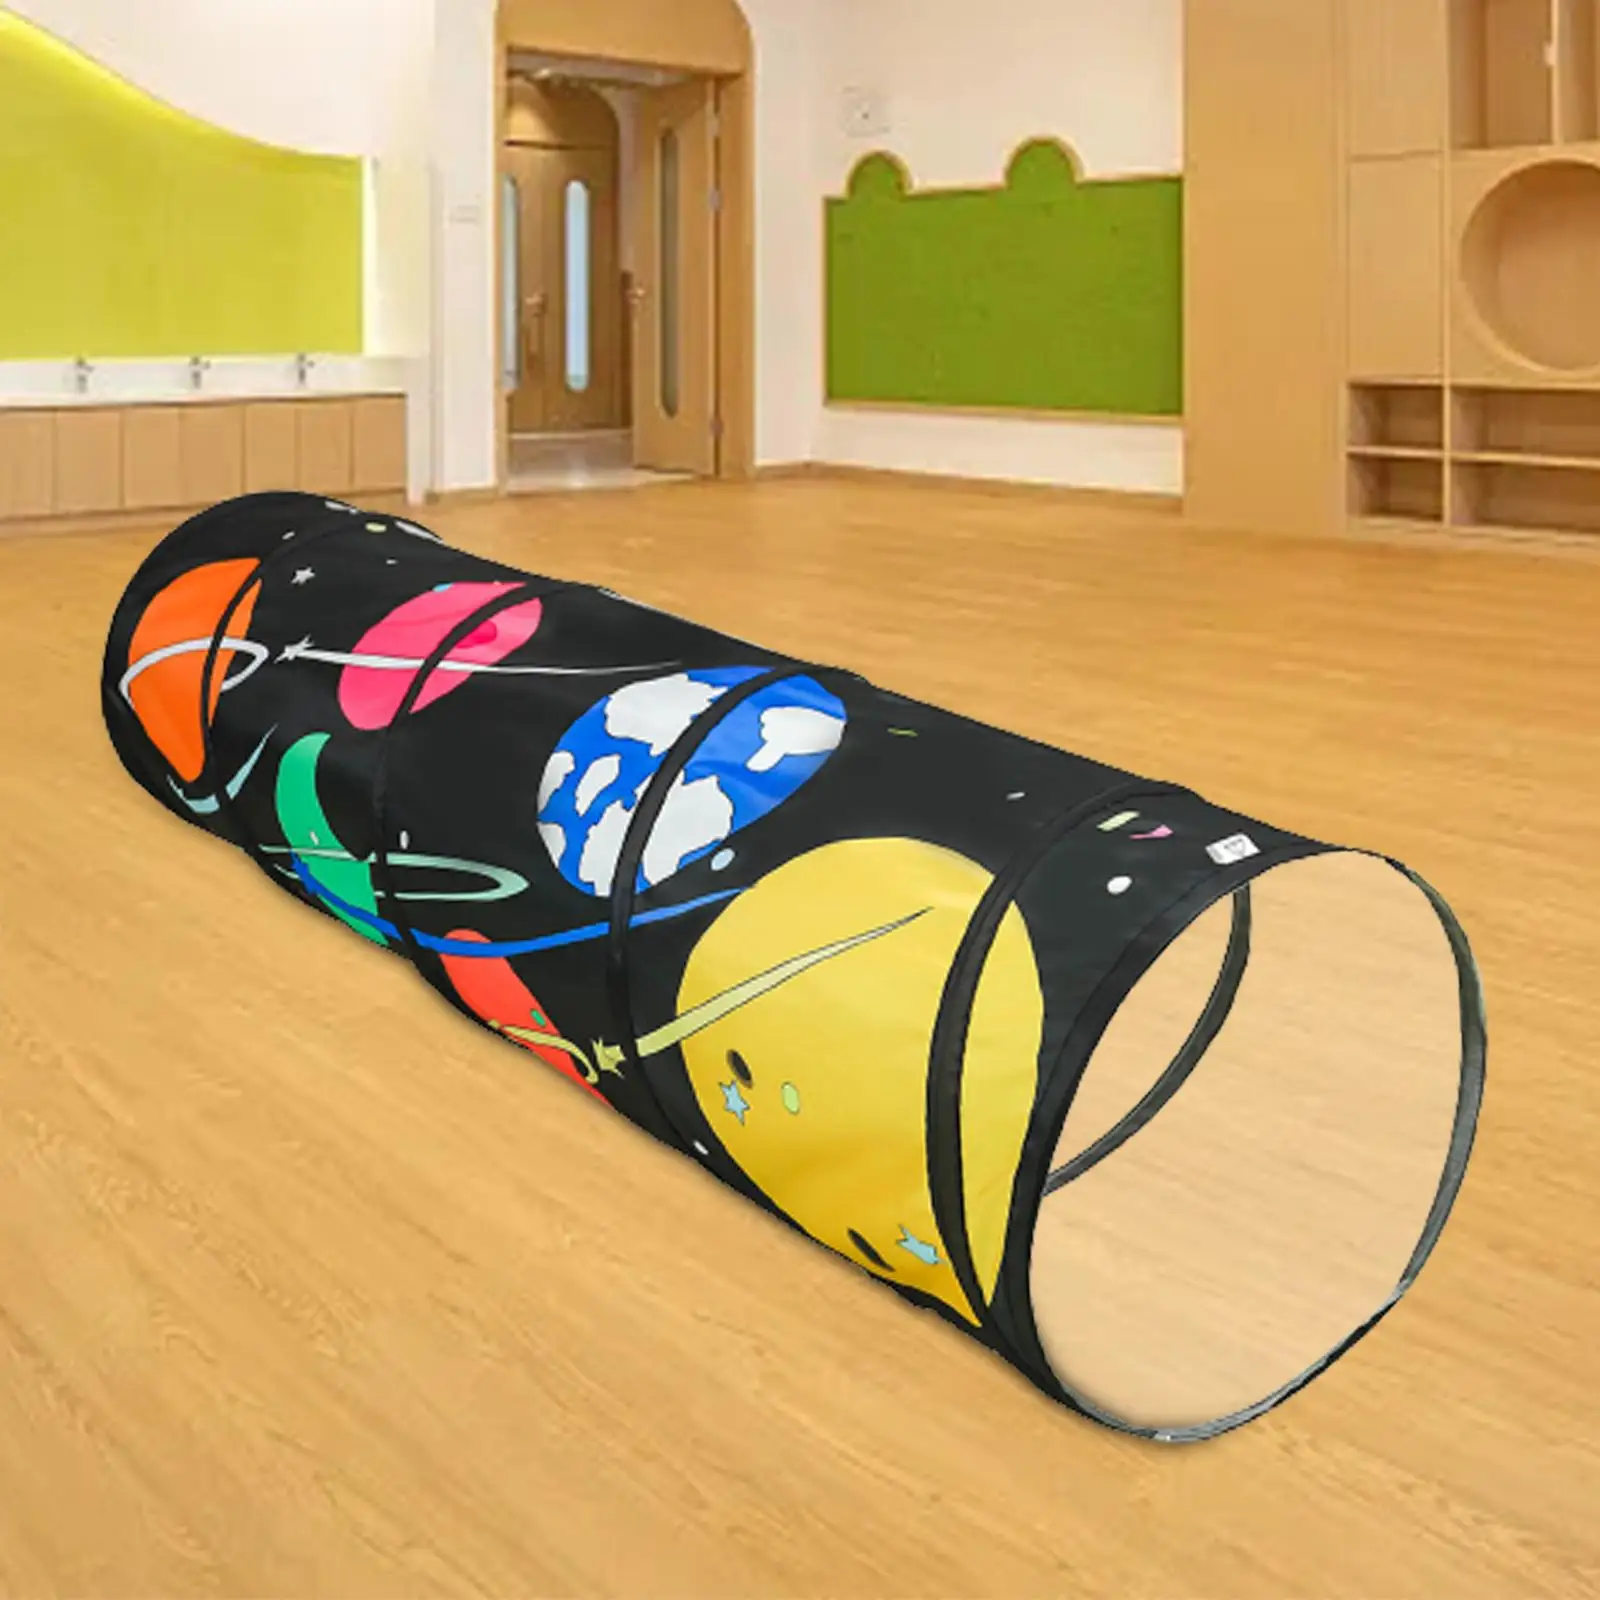 Pop up Toddlers Tunnel 1.8M Indoor Crawl Tube Kids Crawl through Play Tunnel for Boys Children Backyard Baby Birthday Gifts